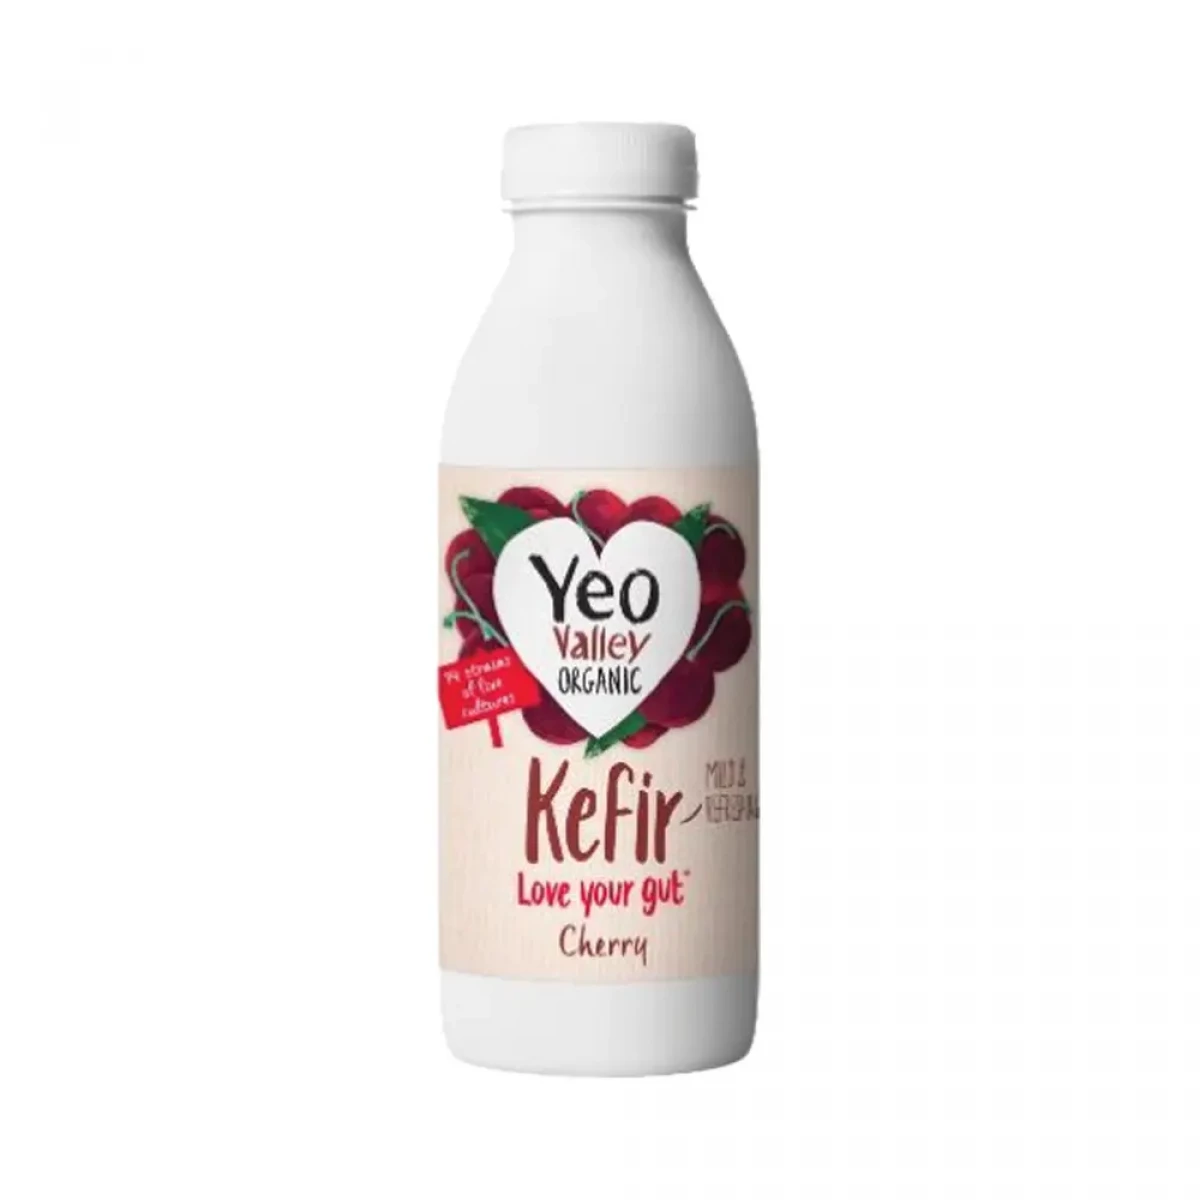 Product picture for Kefir Drink - Cherry